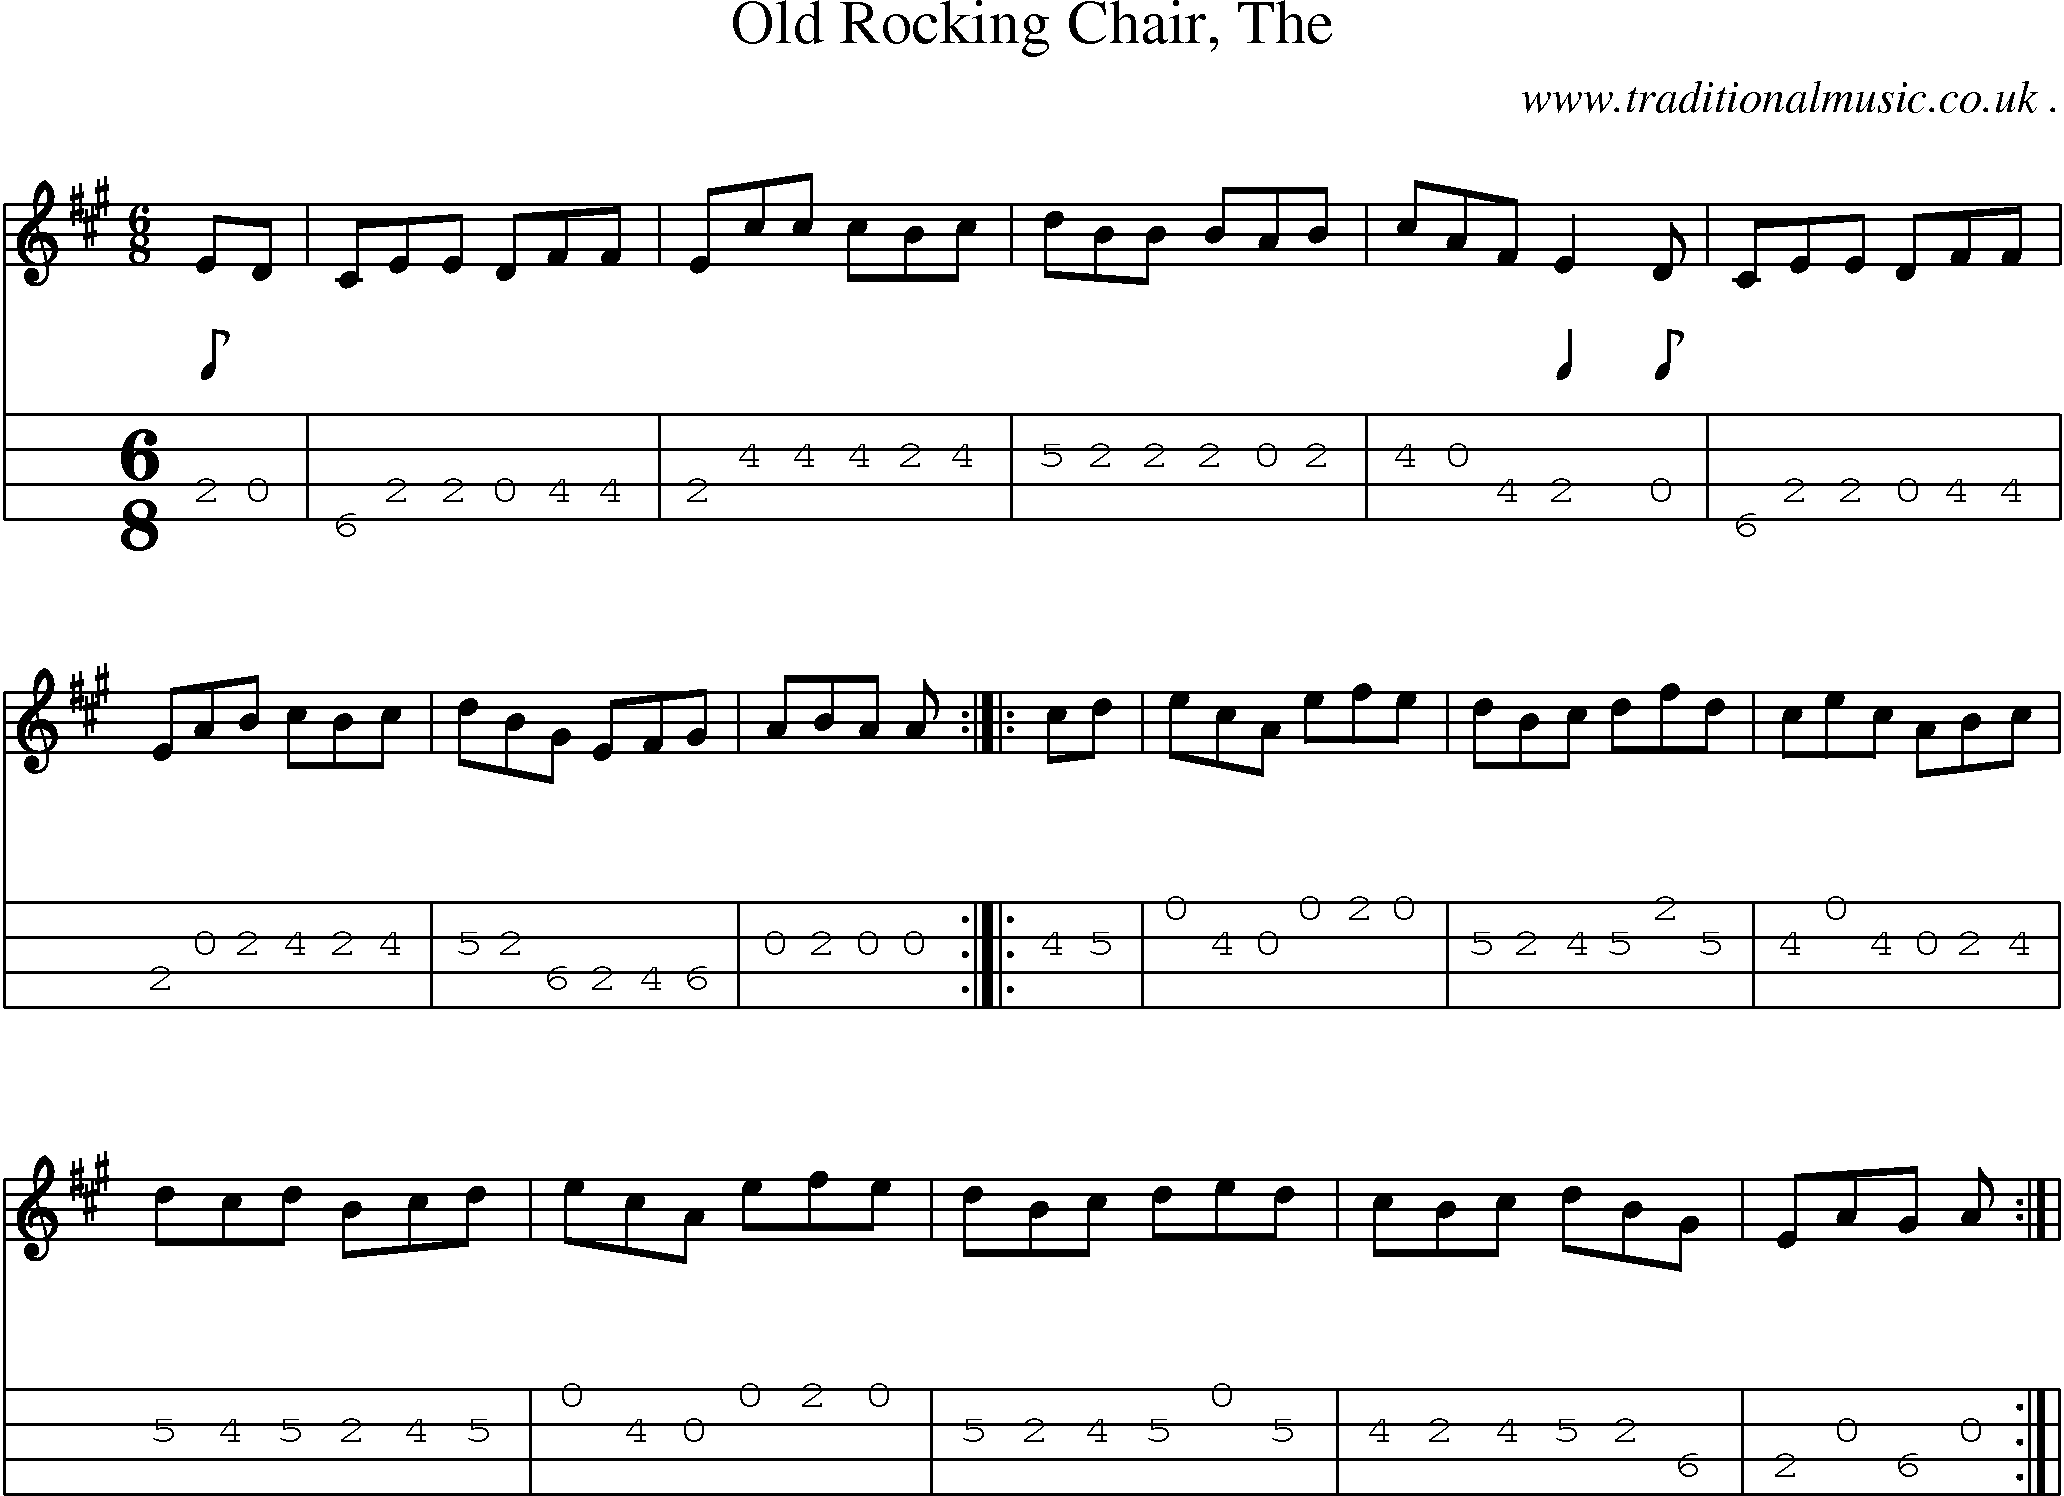 Music Score and Guitar Tabs for Old Rocking Chair The